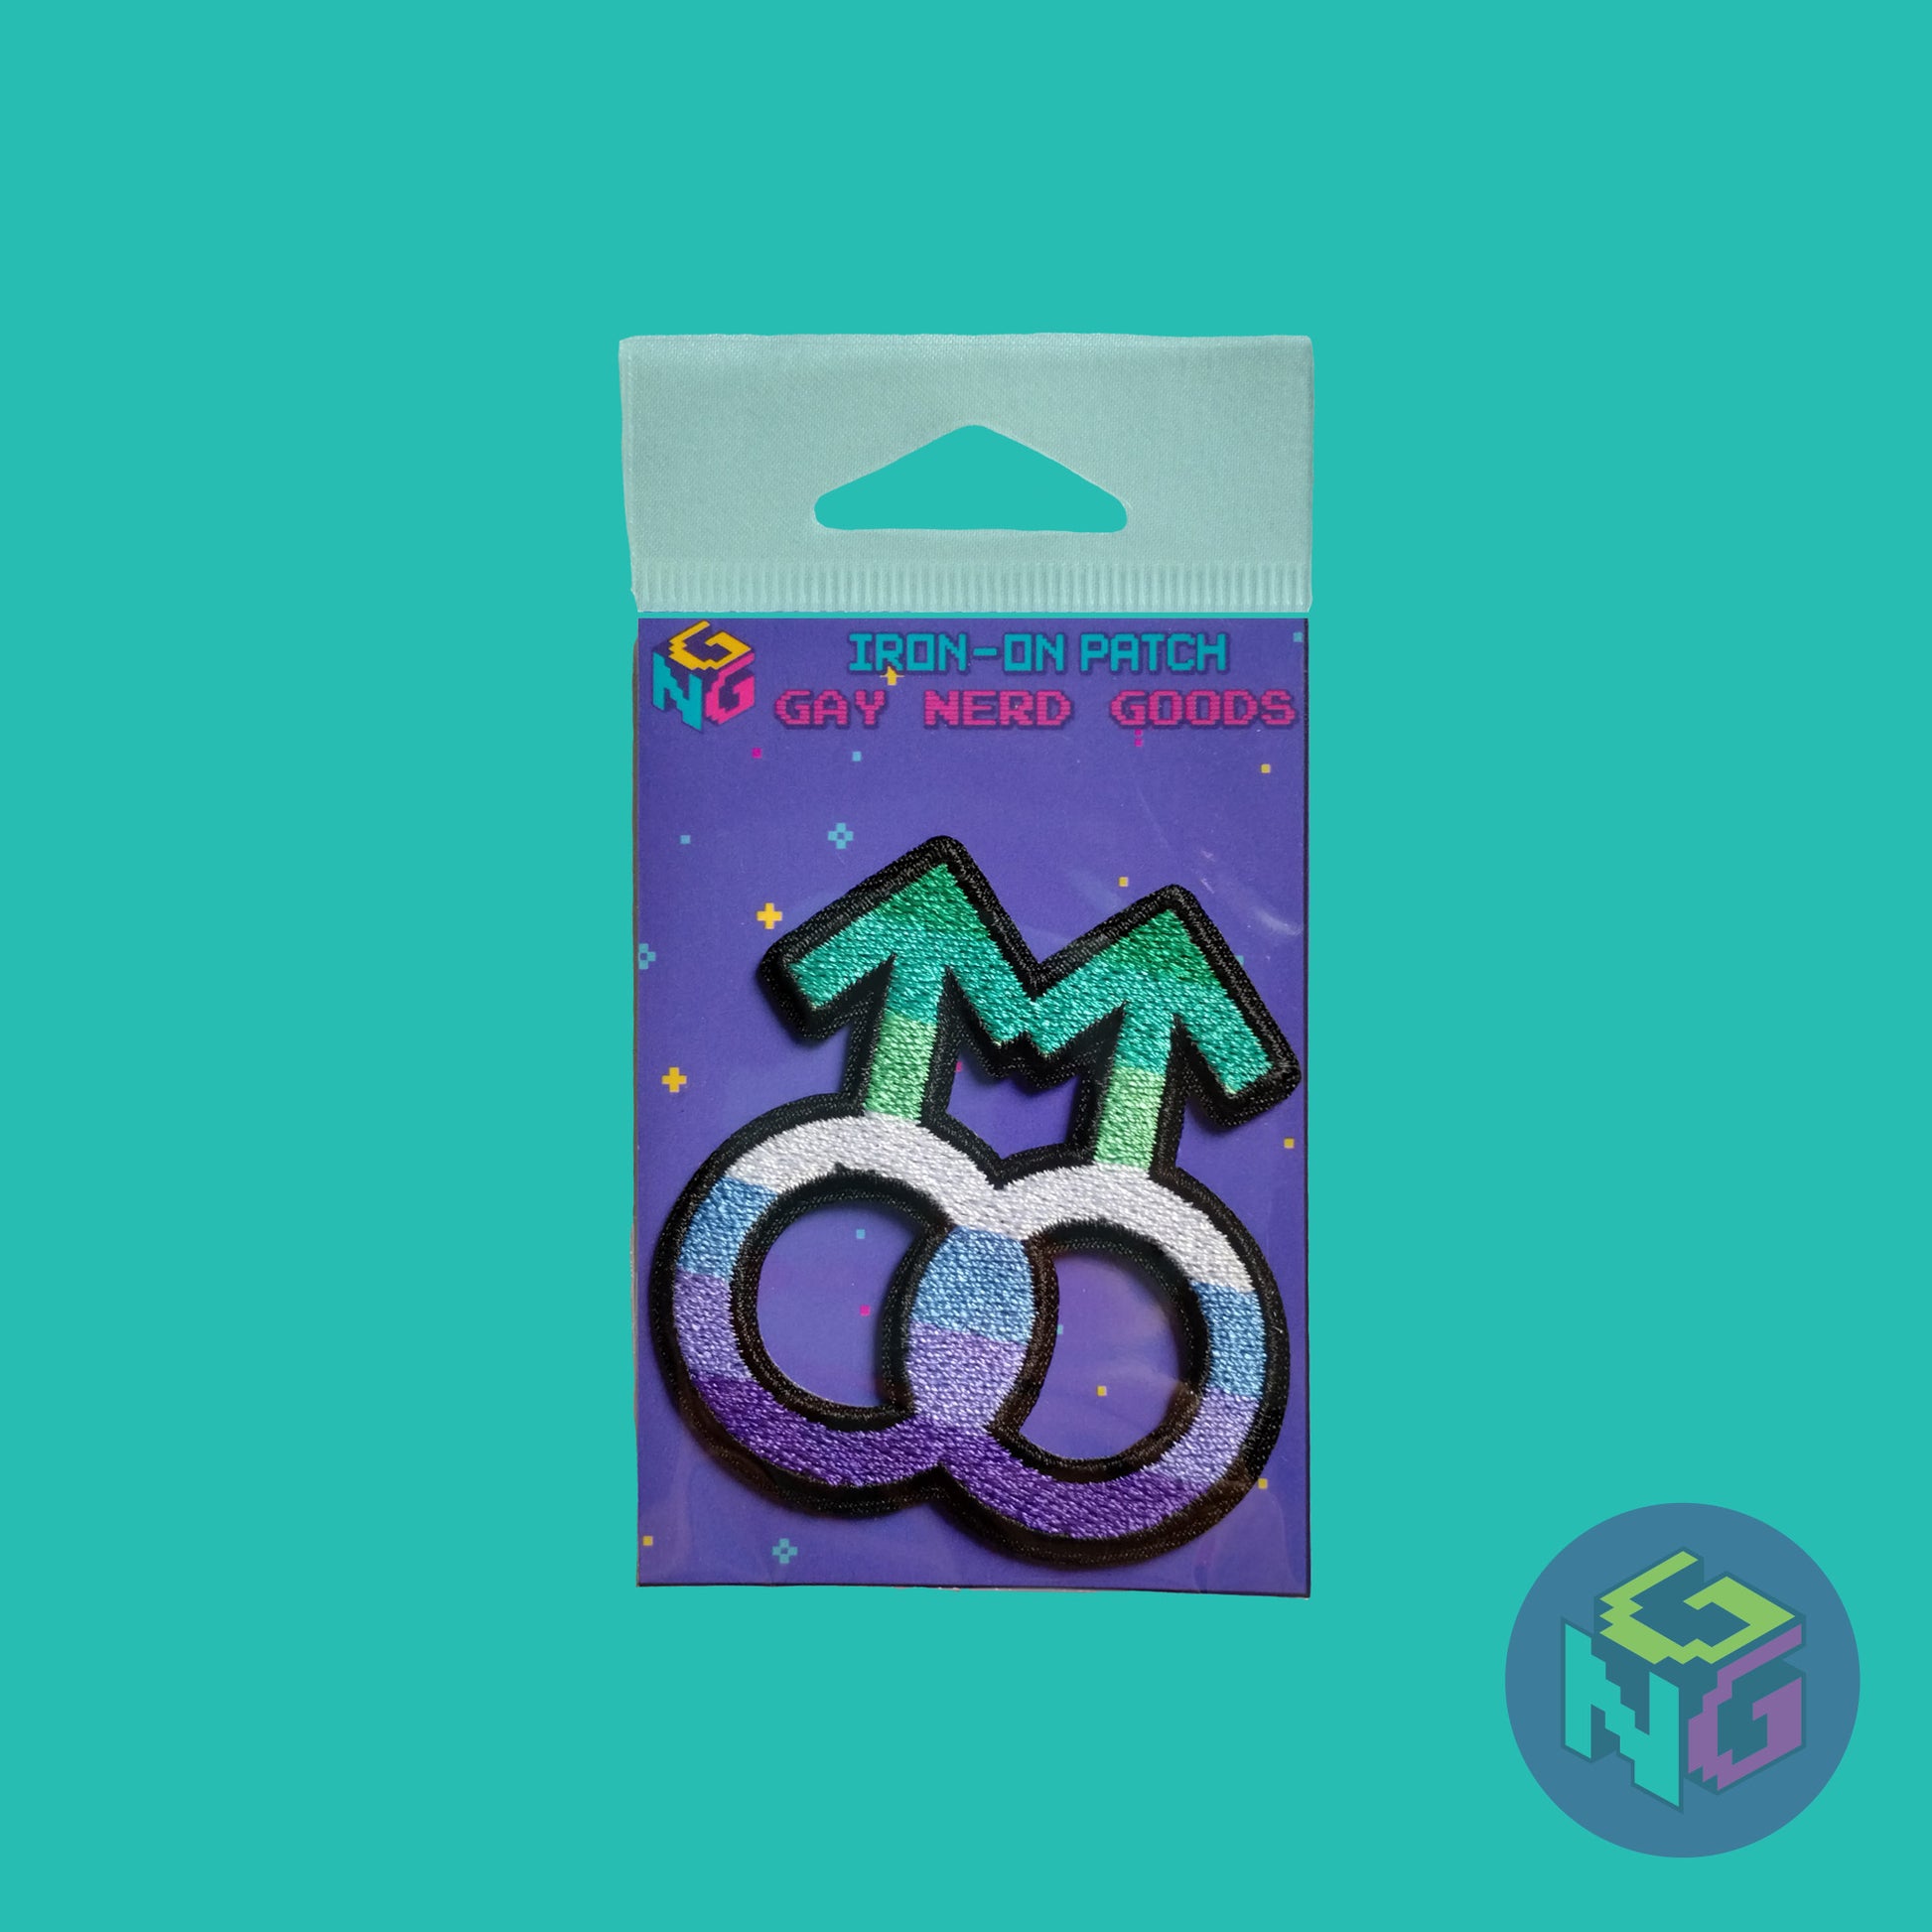 gay mlm patch in its purple packaging on a mint green background